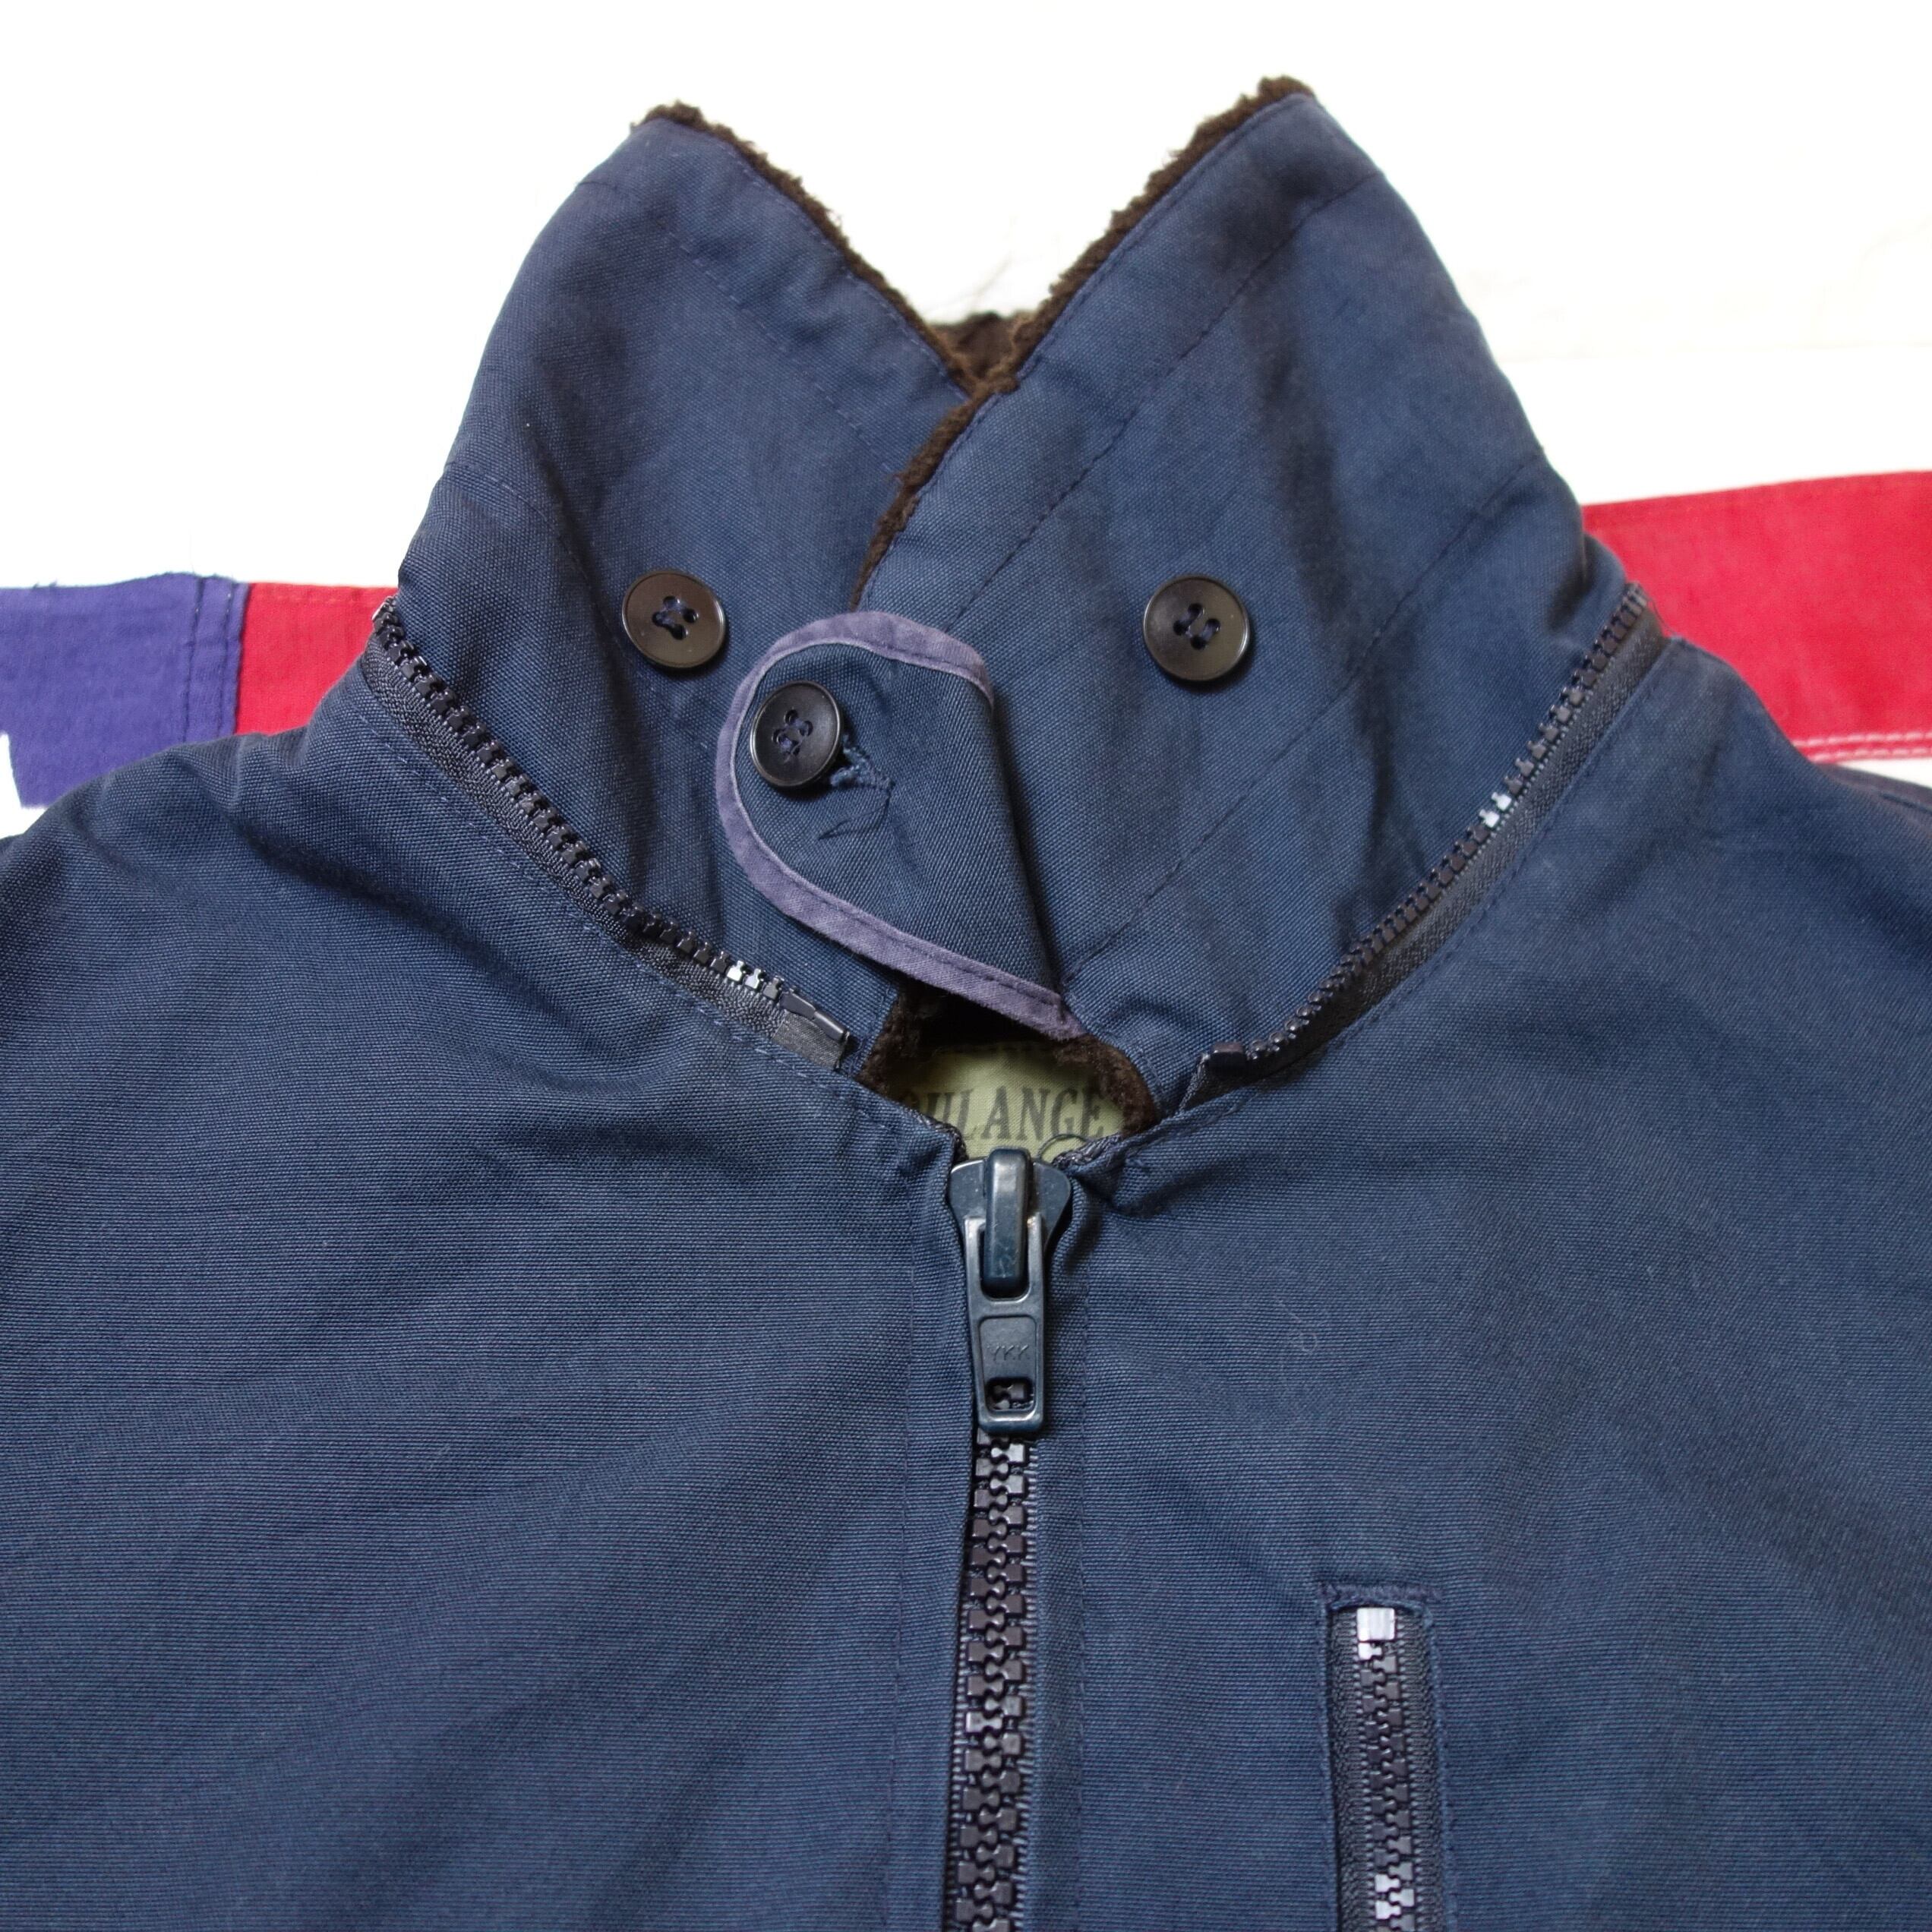 70's French Army Navy Deck jacket Vintage フランス軍 デッキジャケット N-1タイプ ヴィンテージ